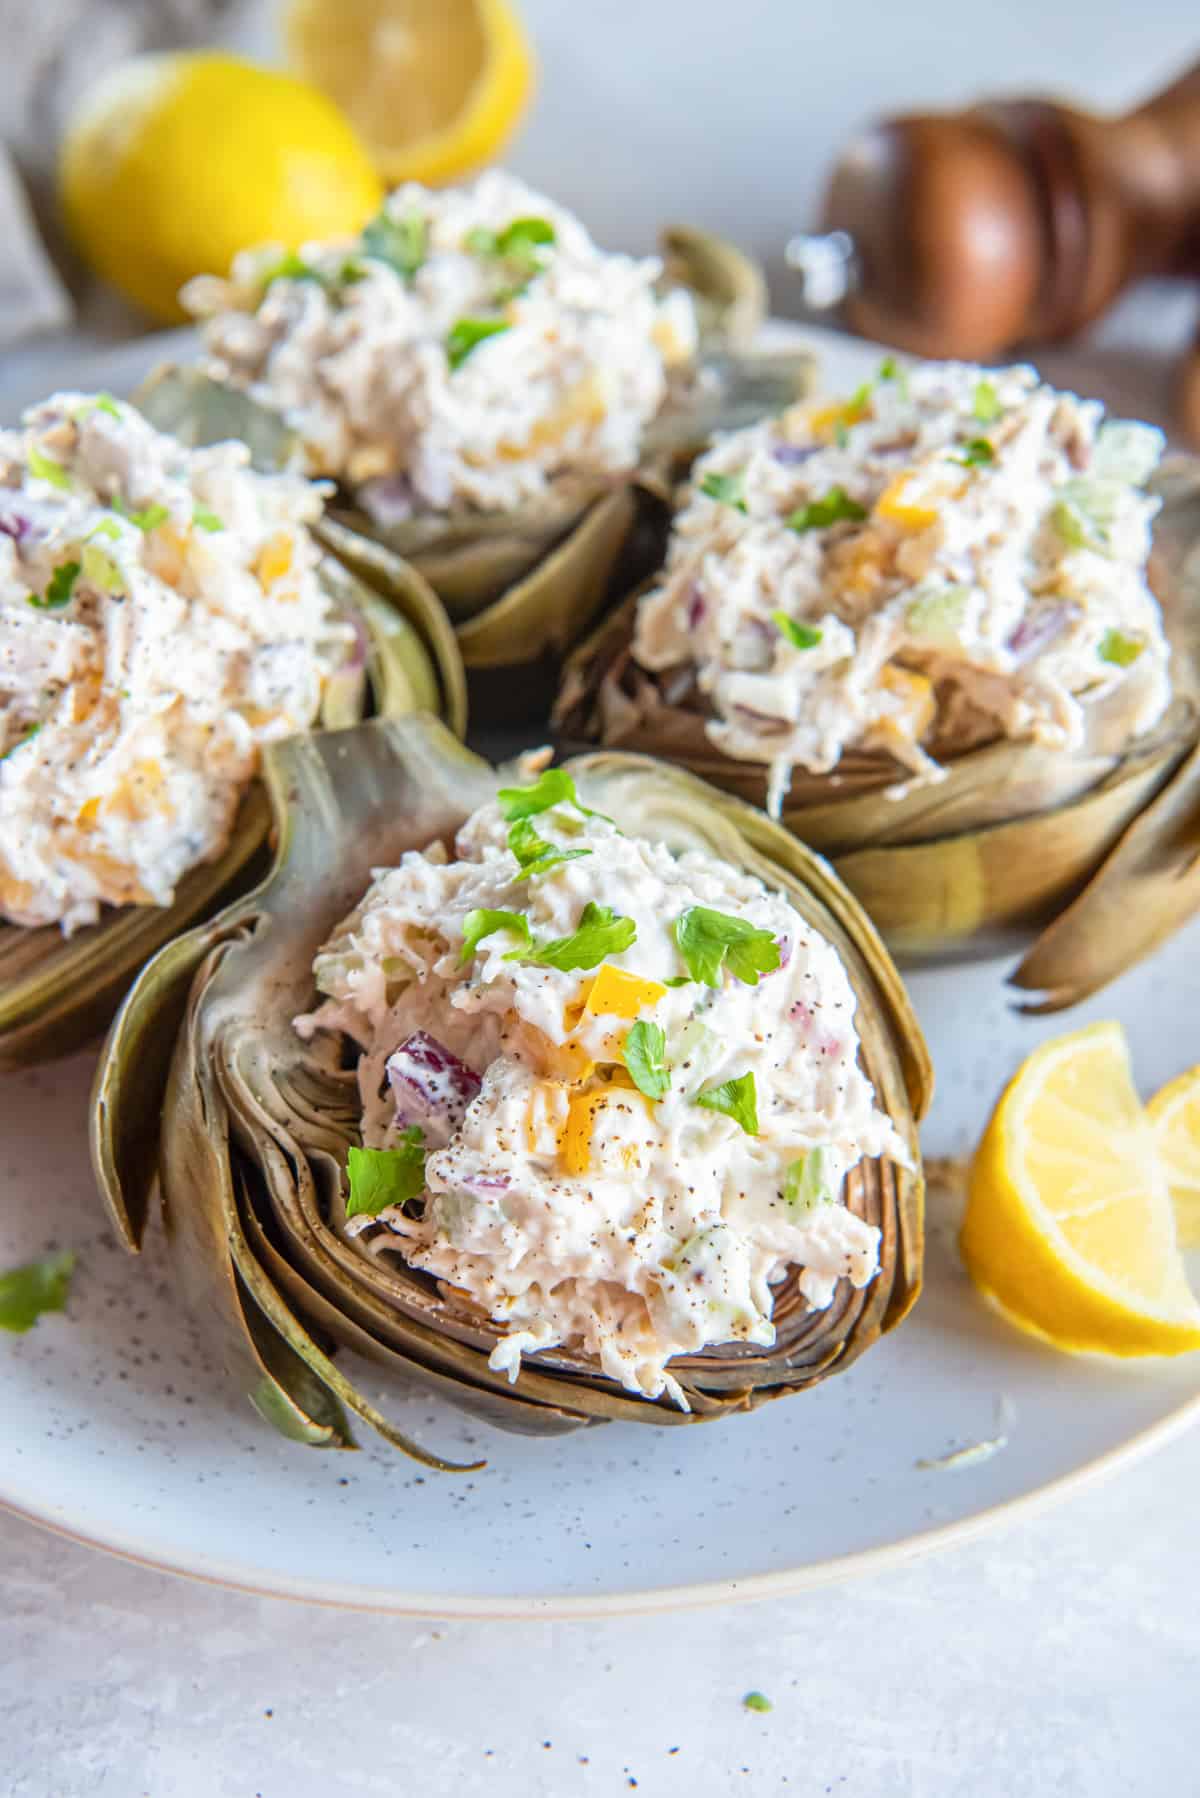 three-quarters view of 4 chicken salad stuffed artichokes on a white plate.